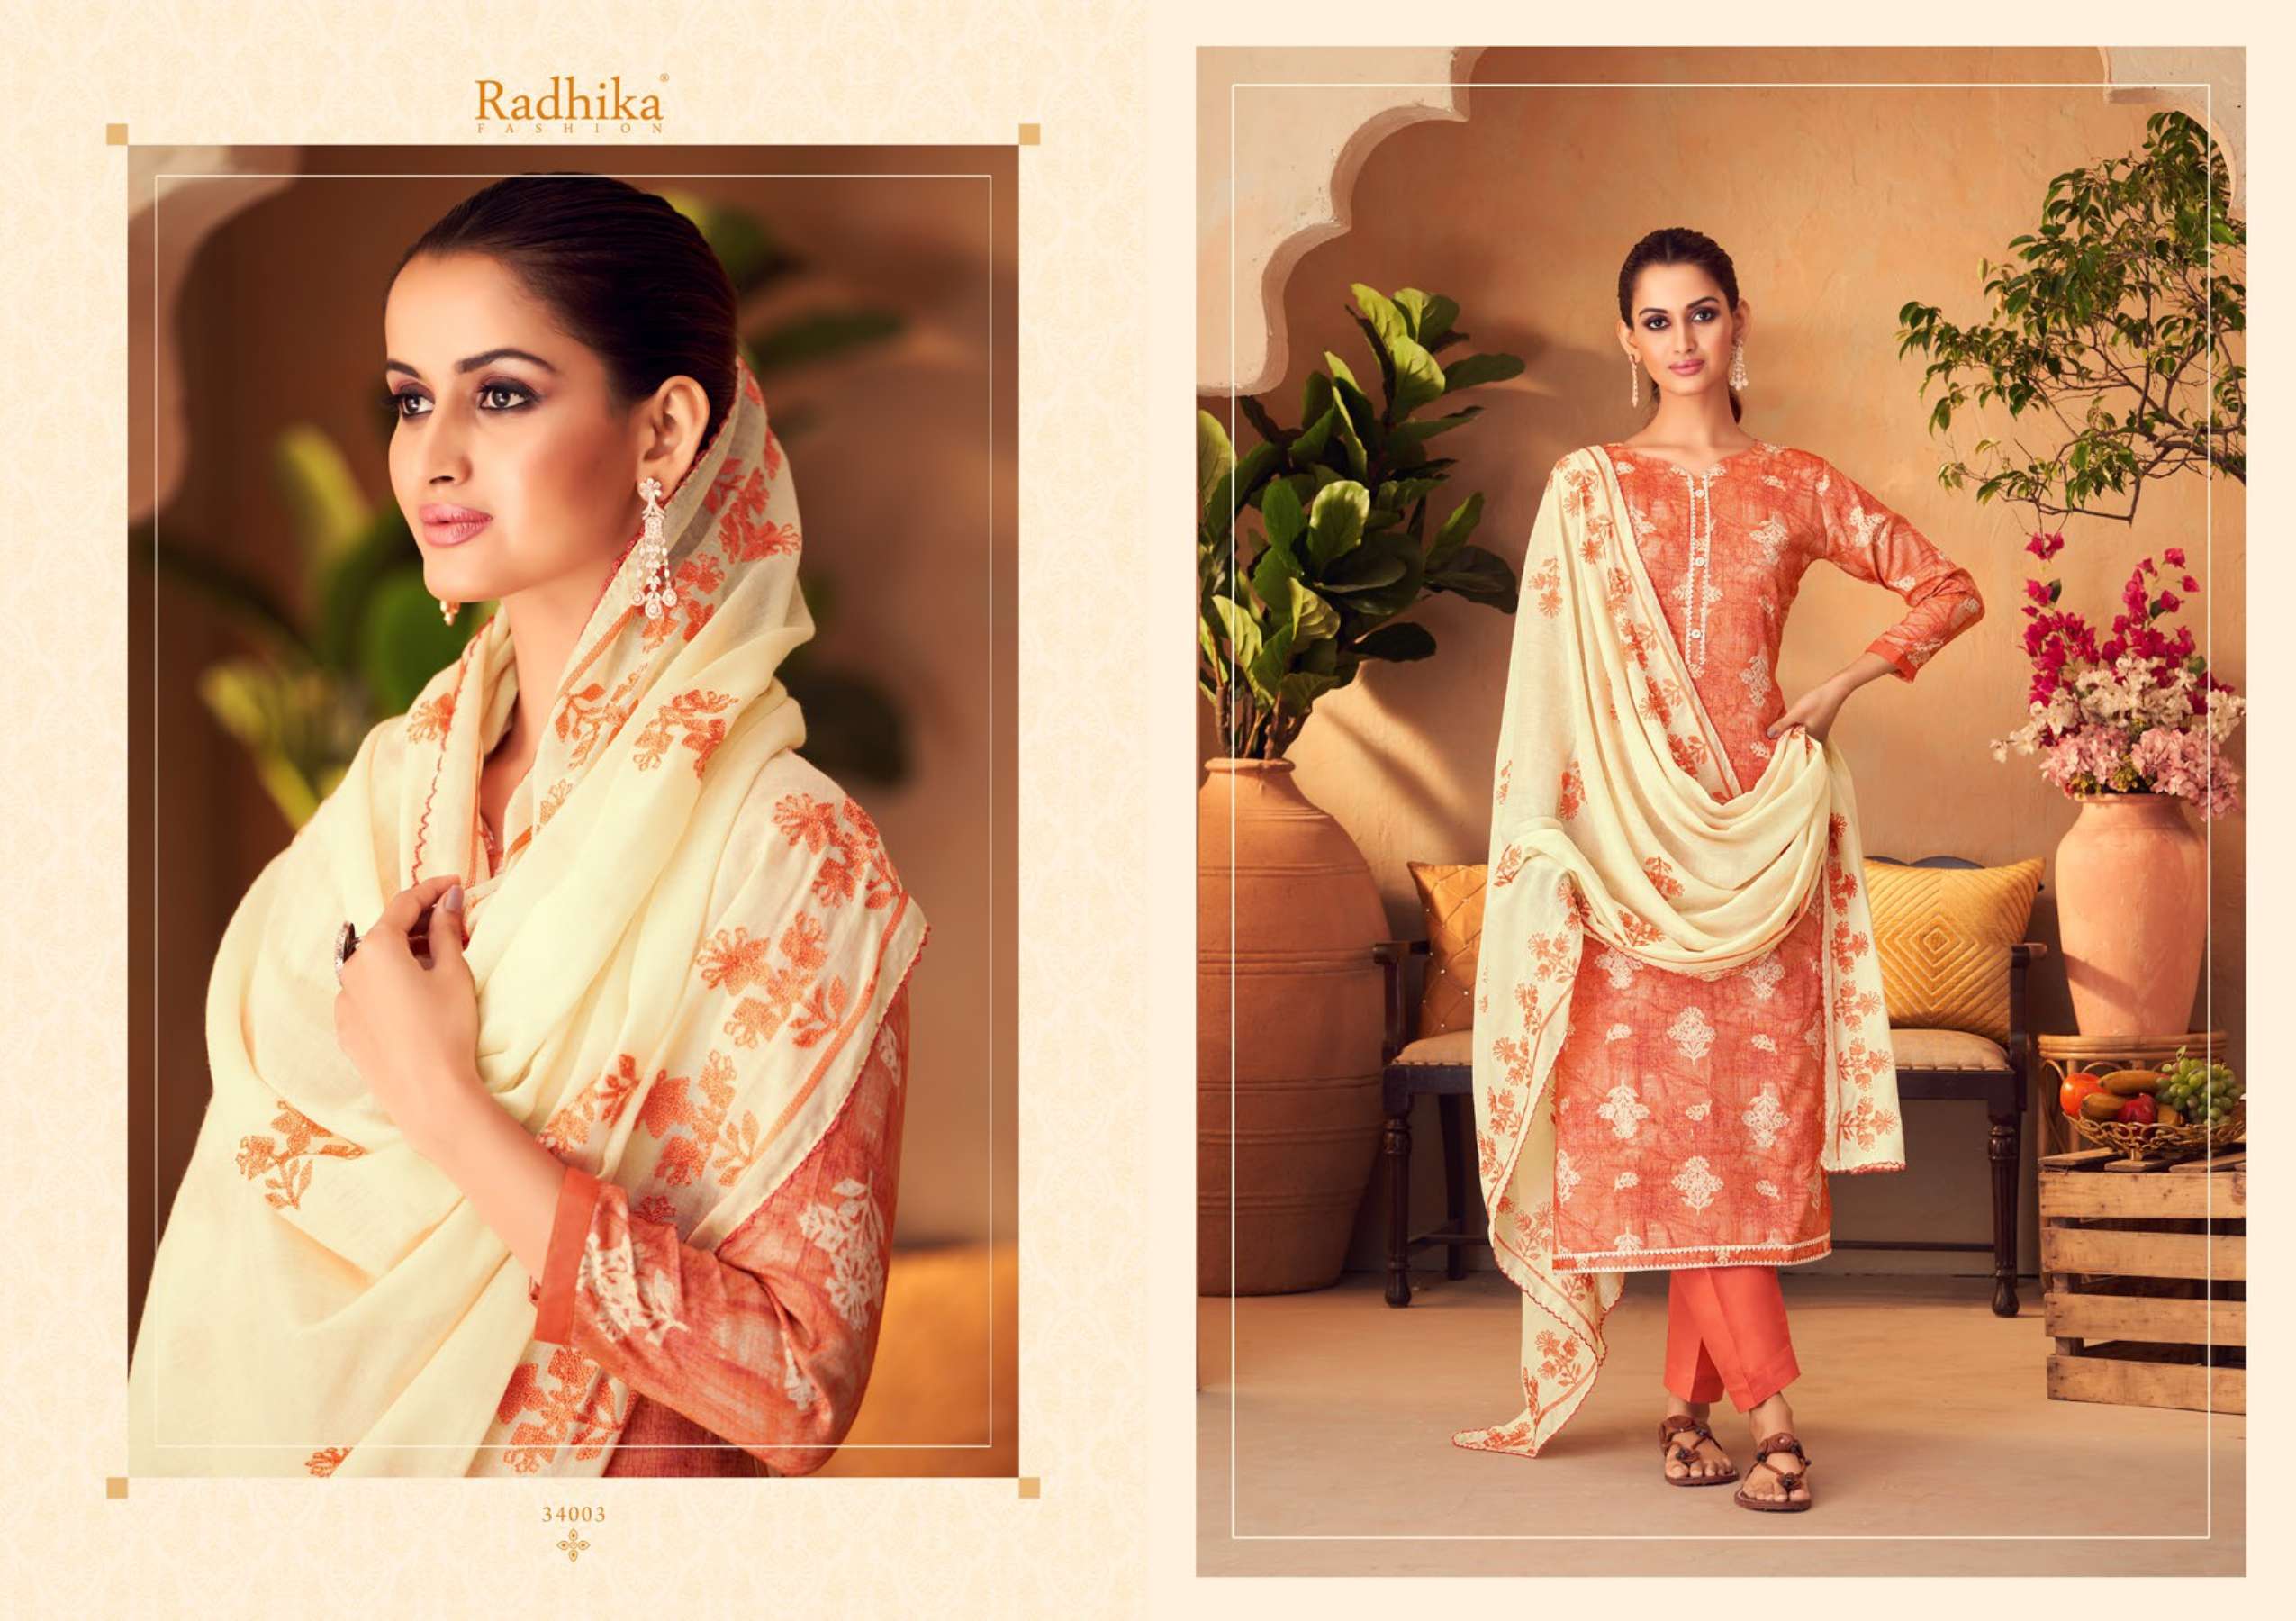 Radhika Blossom 11 Ready Made Exclusive Fancy Dress Materials Wholesale catalog